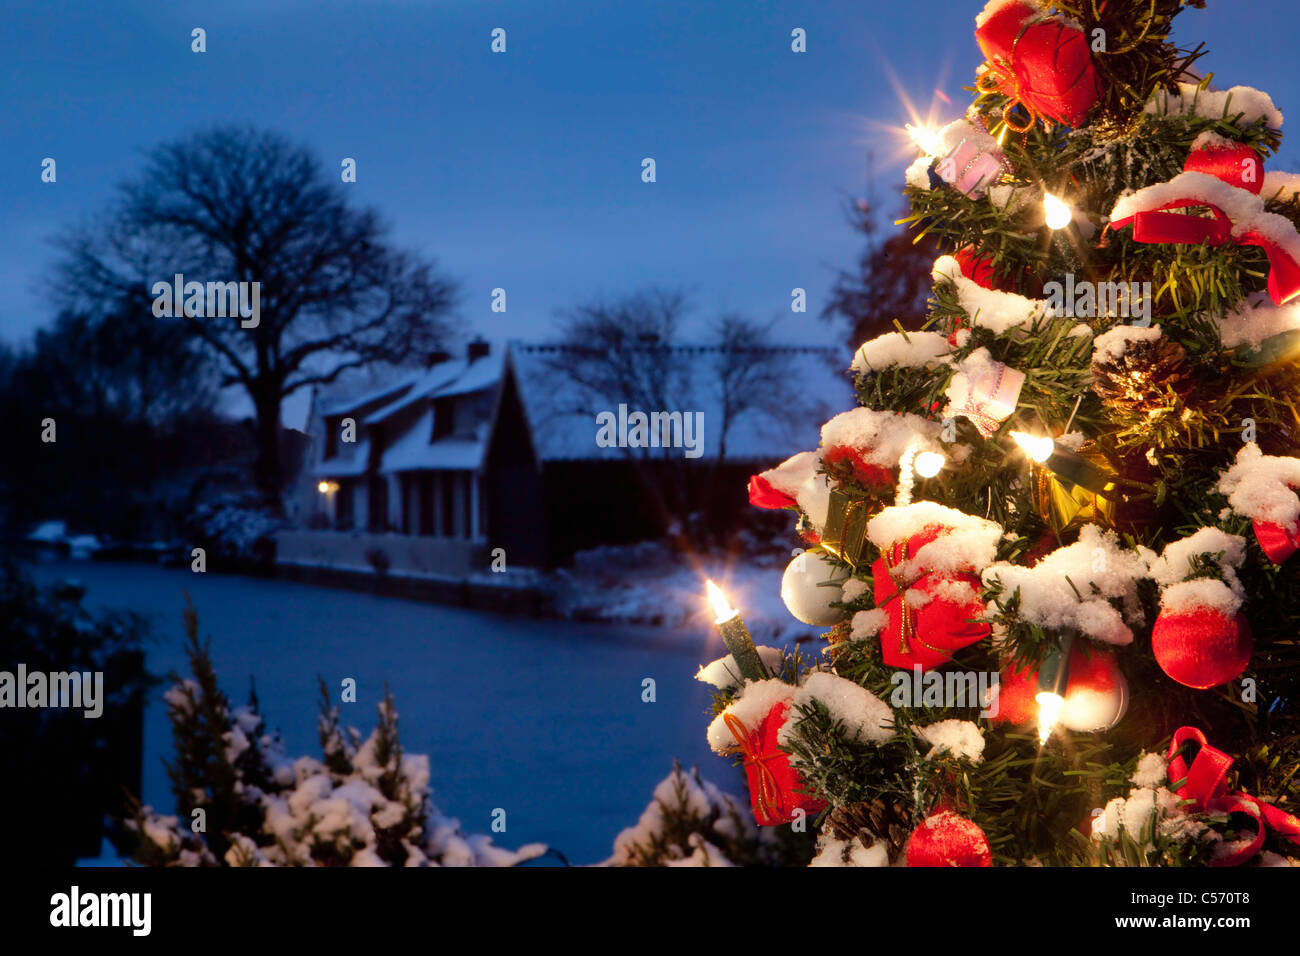 The Netherlands, 's-Graveland, Christmas trees with lights in snow. Dusk. Stock Photo